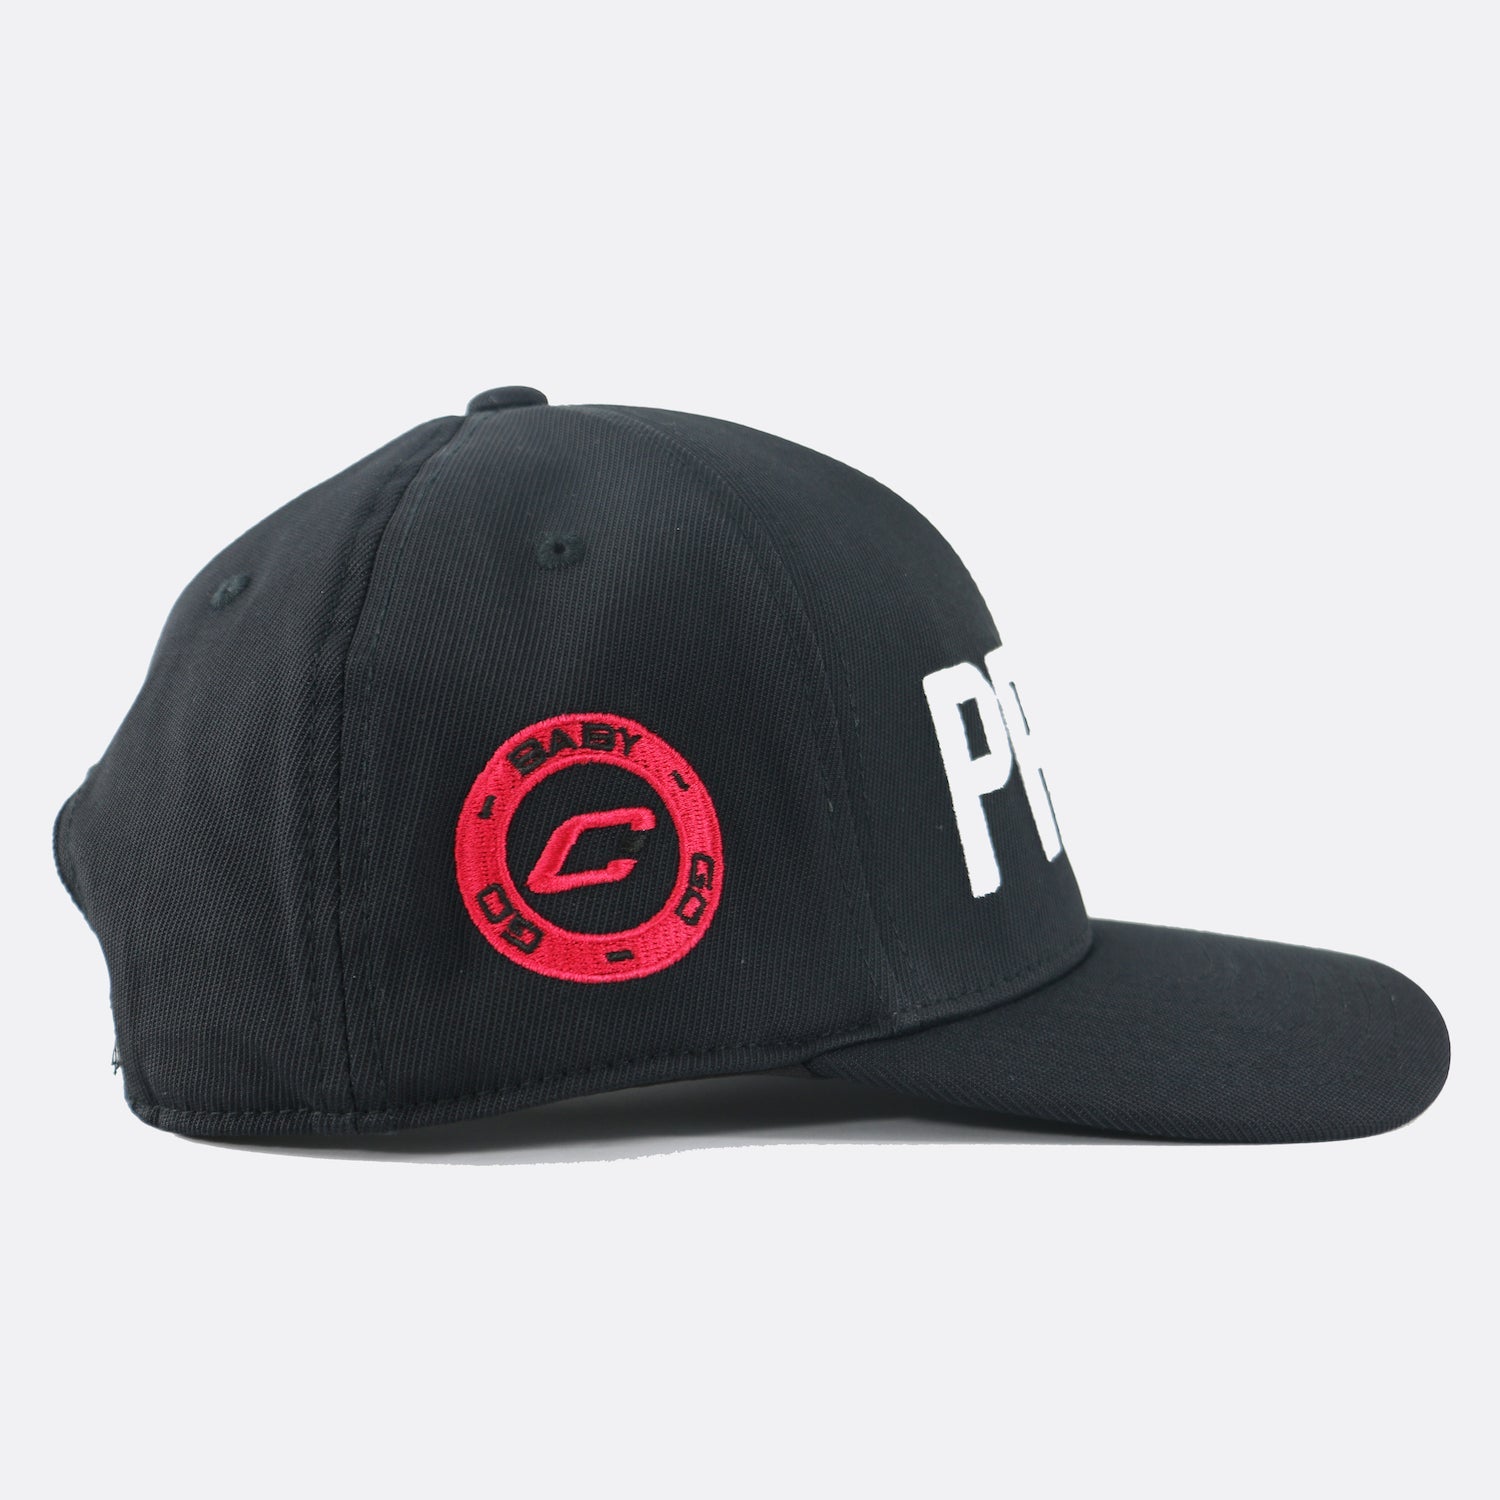 G/FORE×Protoconcept Cap - 10